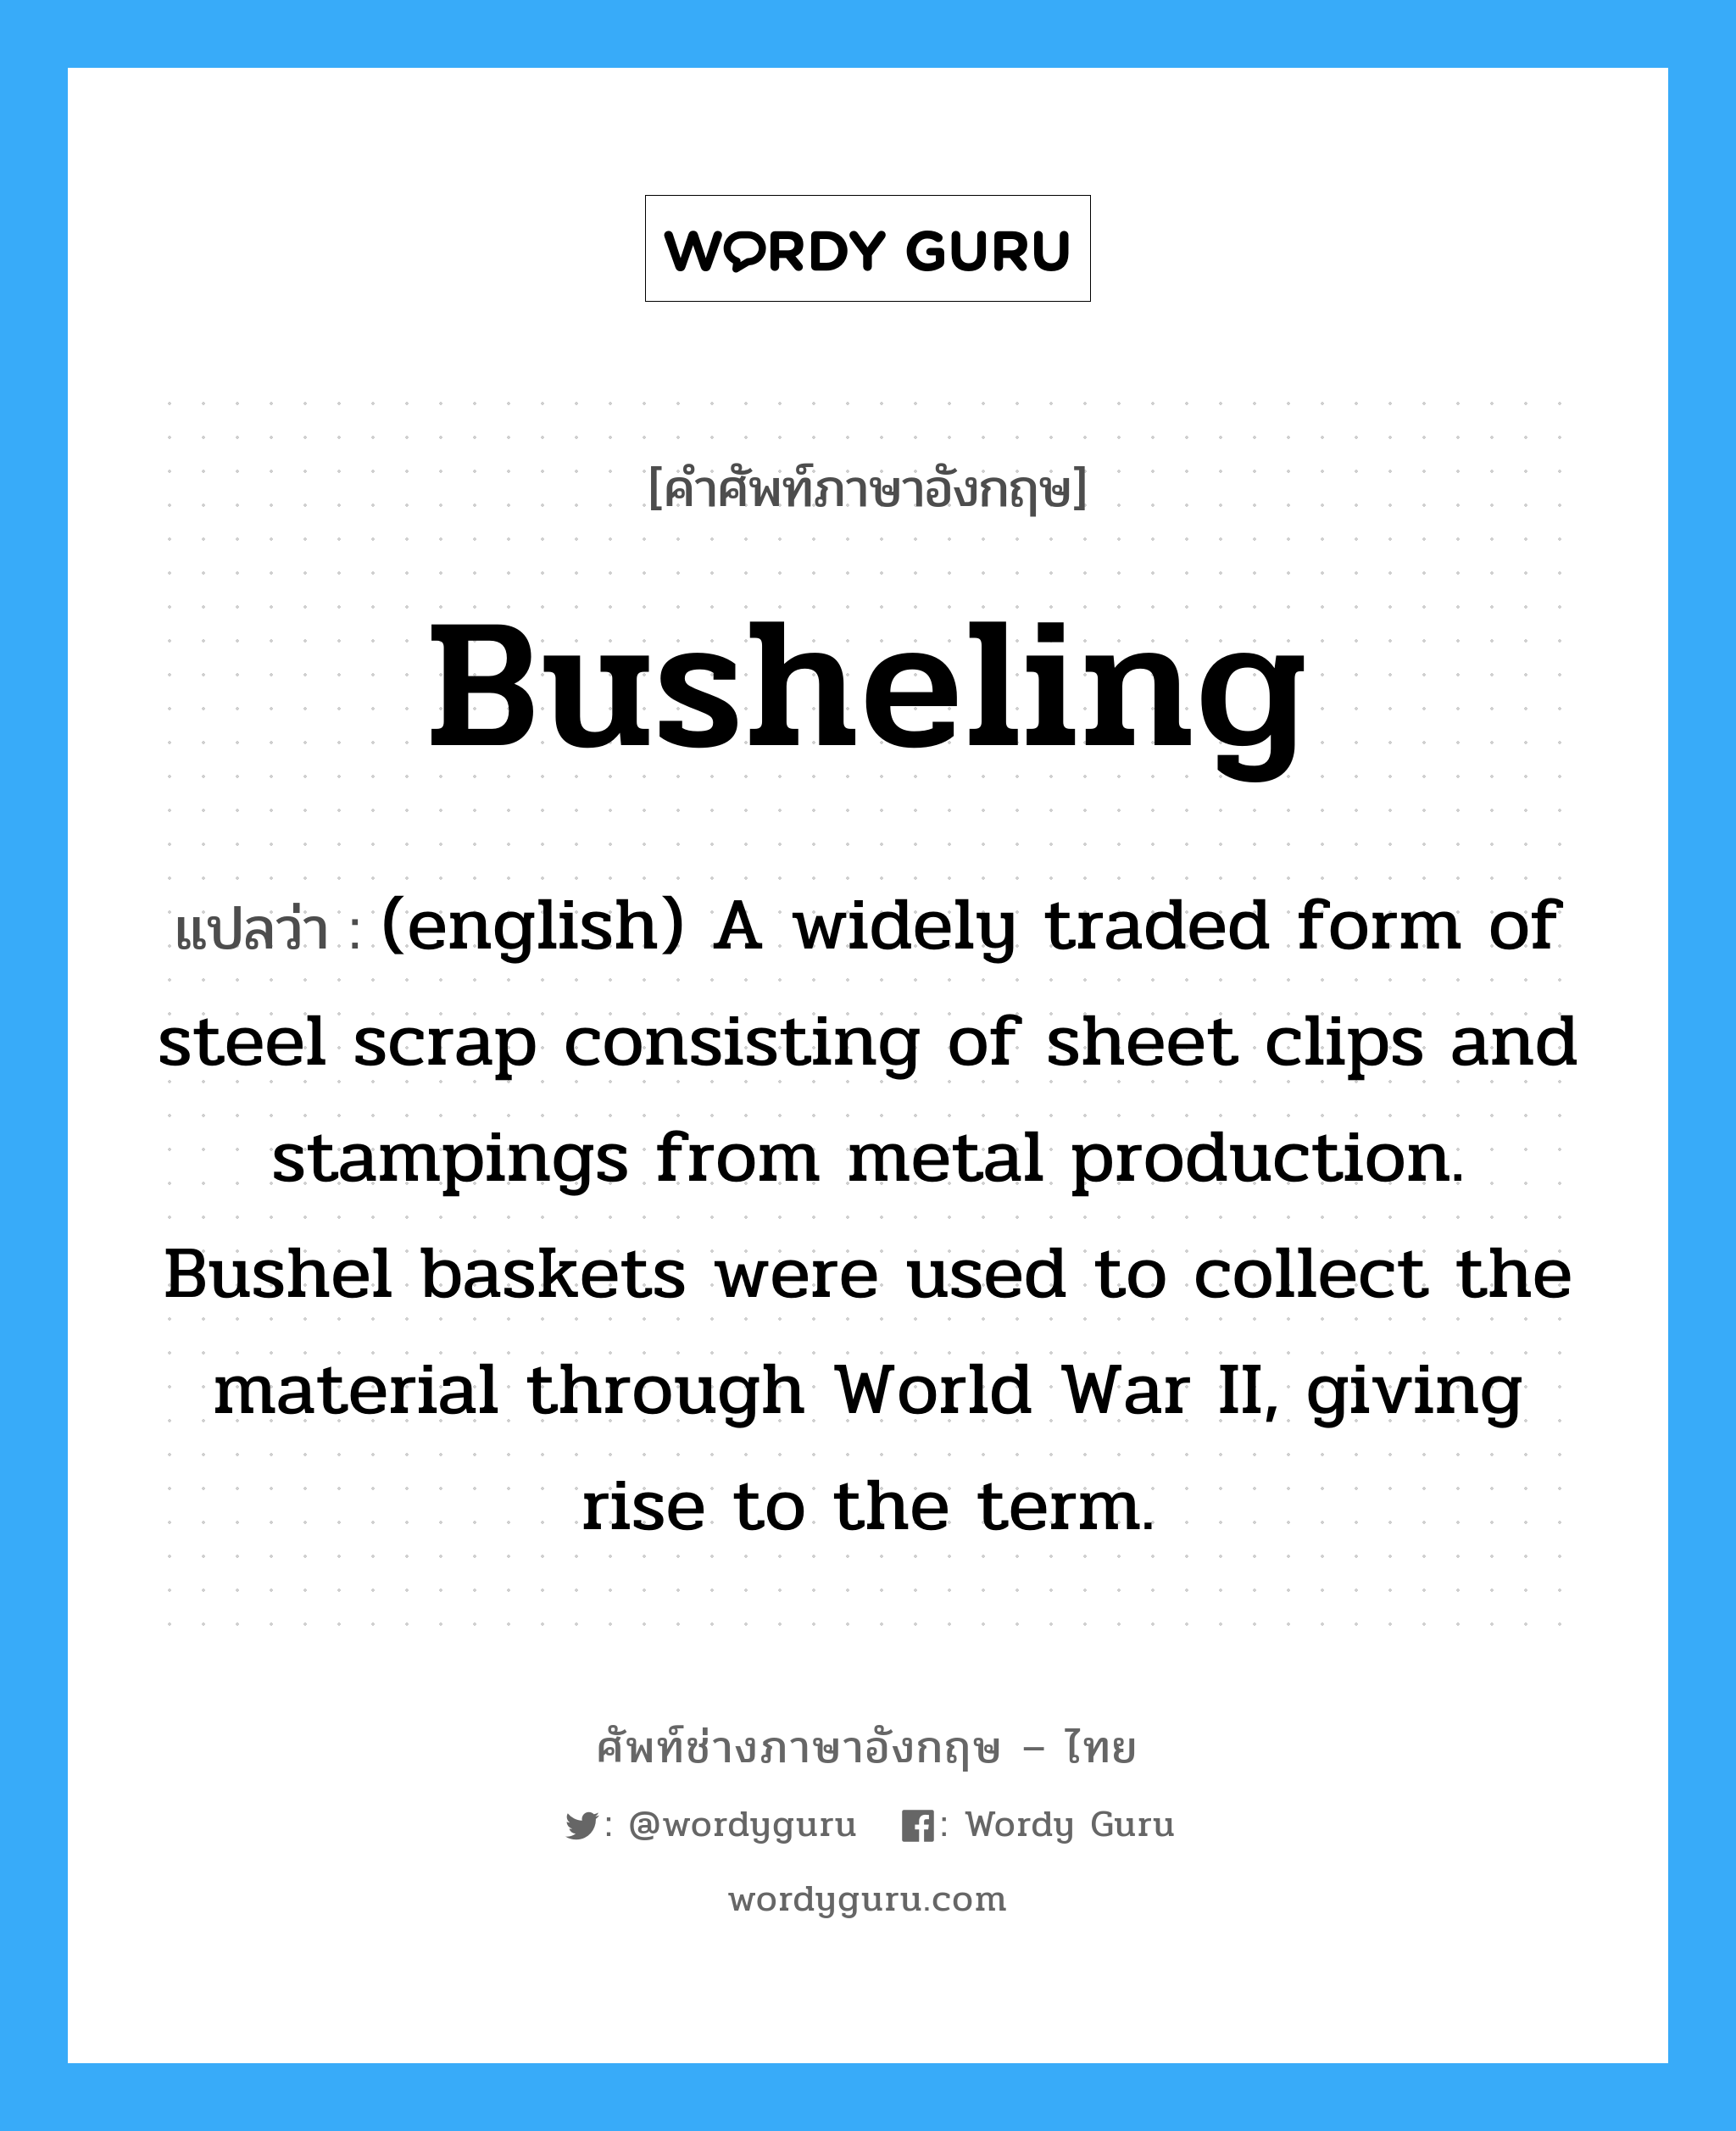 Busheling แปลว่า?, คำศัพท์ช่างภาษาอังกฤษ - ไทย Busheling คำศัพท์ภาษาอังกฤษ Busheling แปลว่า (english) A widely traded form of steel scrap consisting of sheet clips and stampings from metal production. Bushel baskets were used to collect the material through World War II, giving rise to the term.